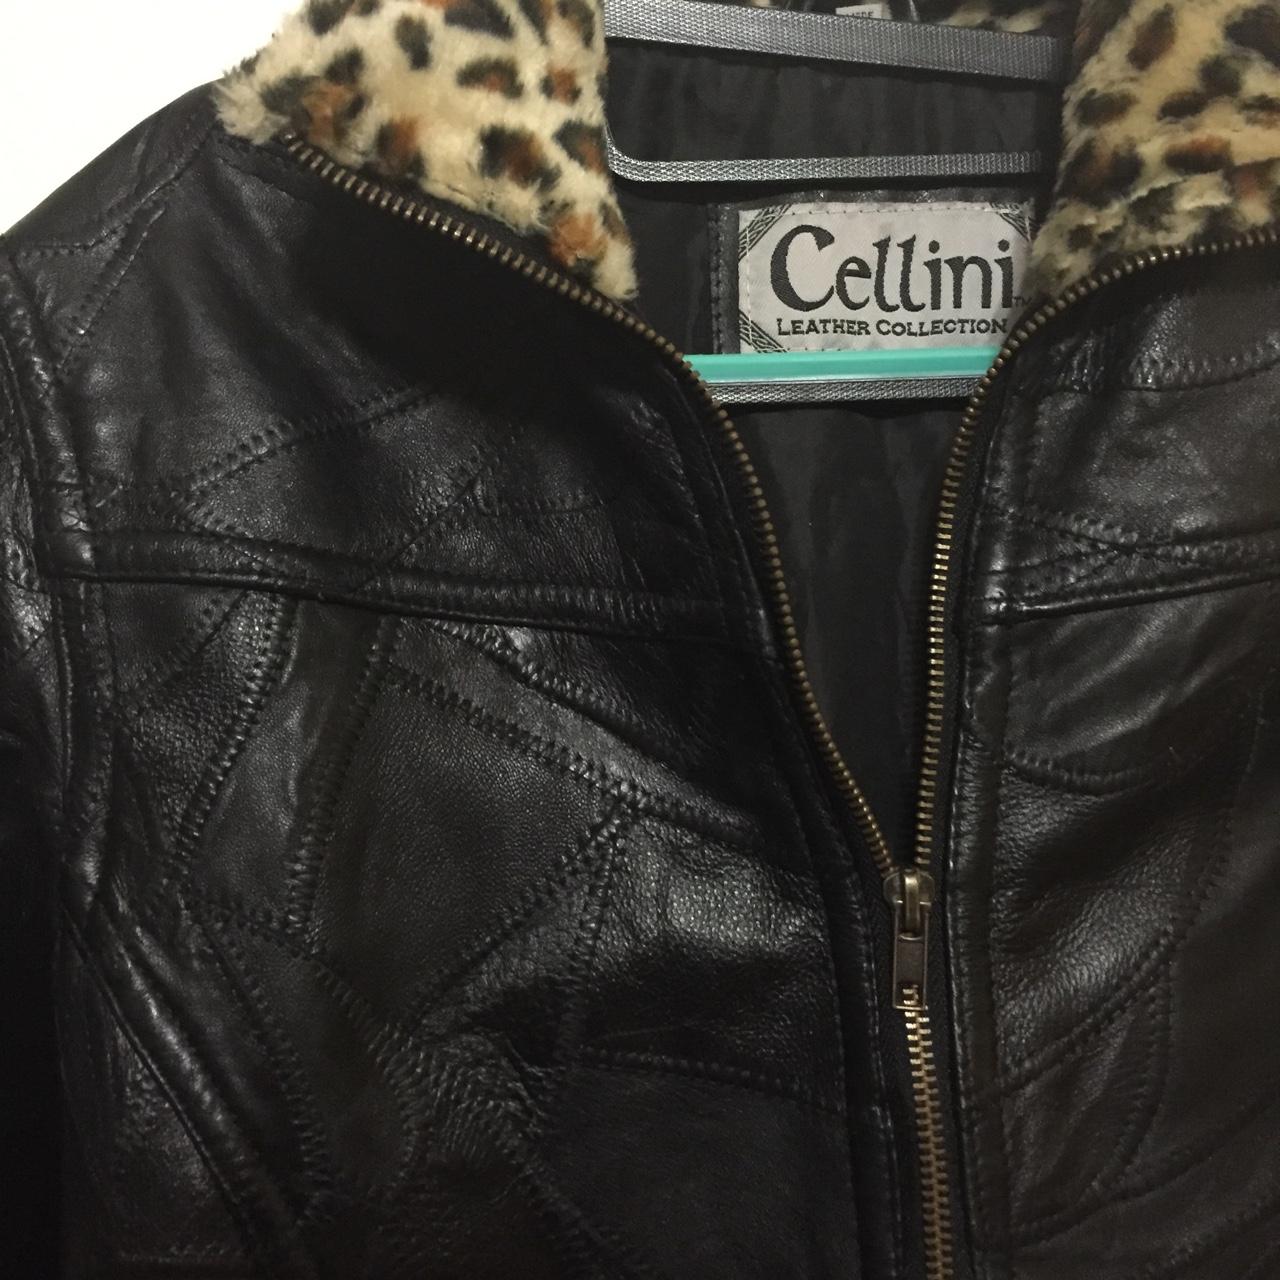 Cellini leather collection jacket. Has a punk feel - Depop